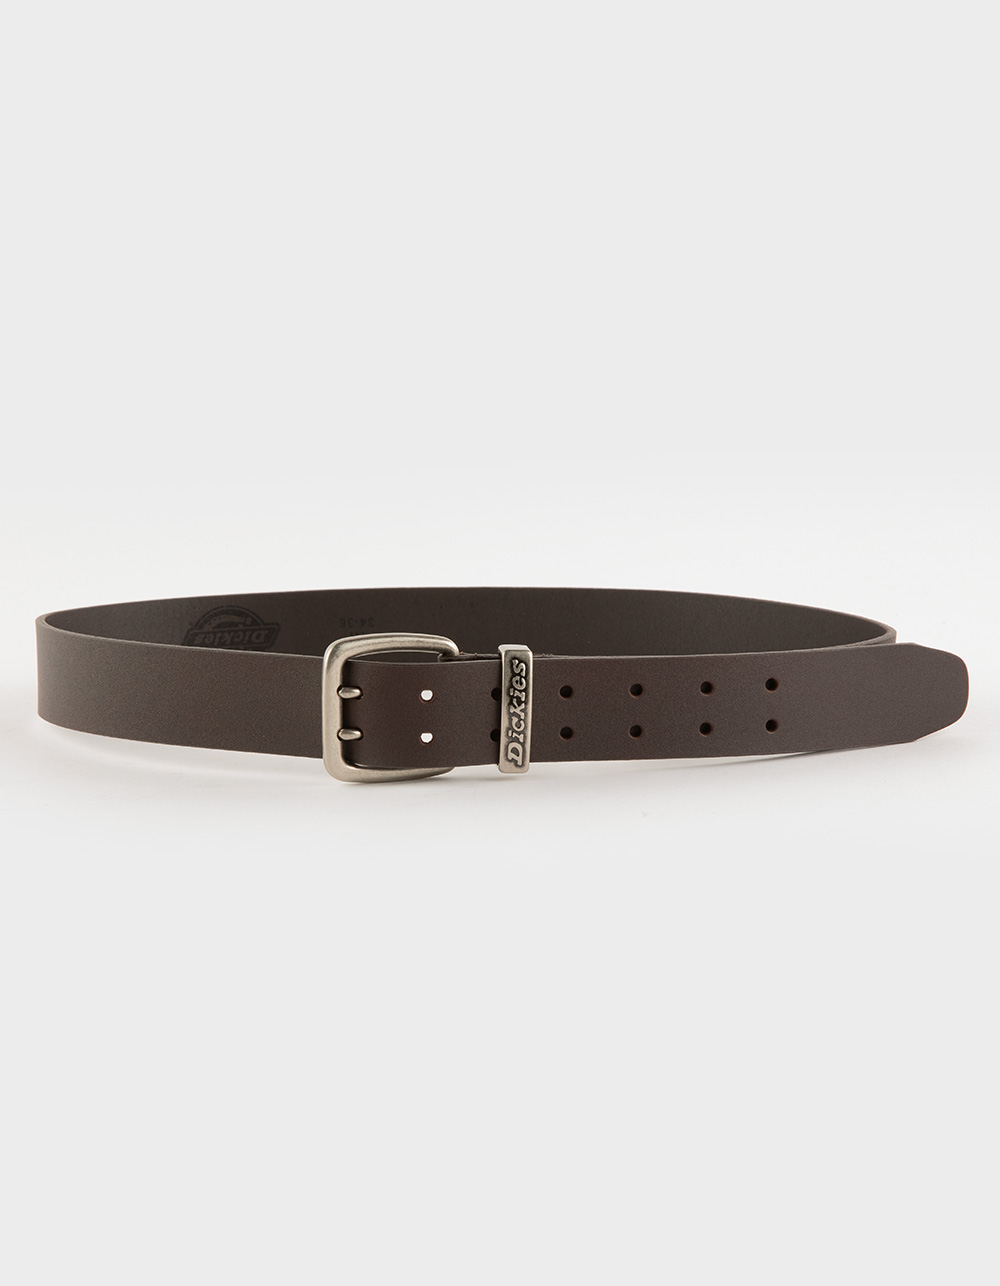 DICKIES Casual Double Prong Mens Belt